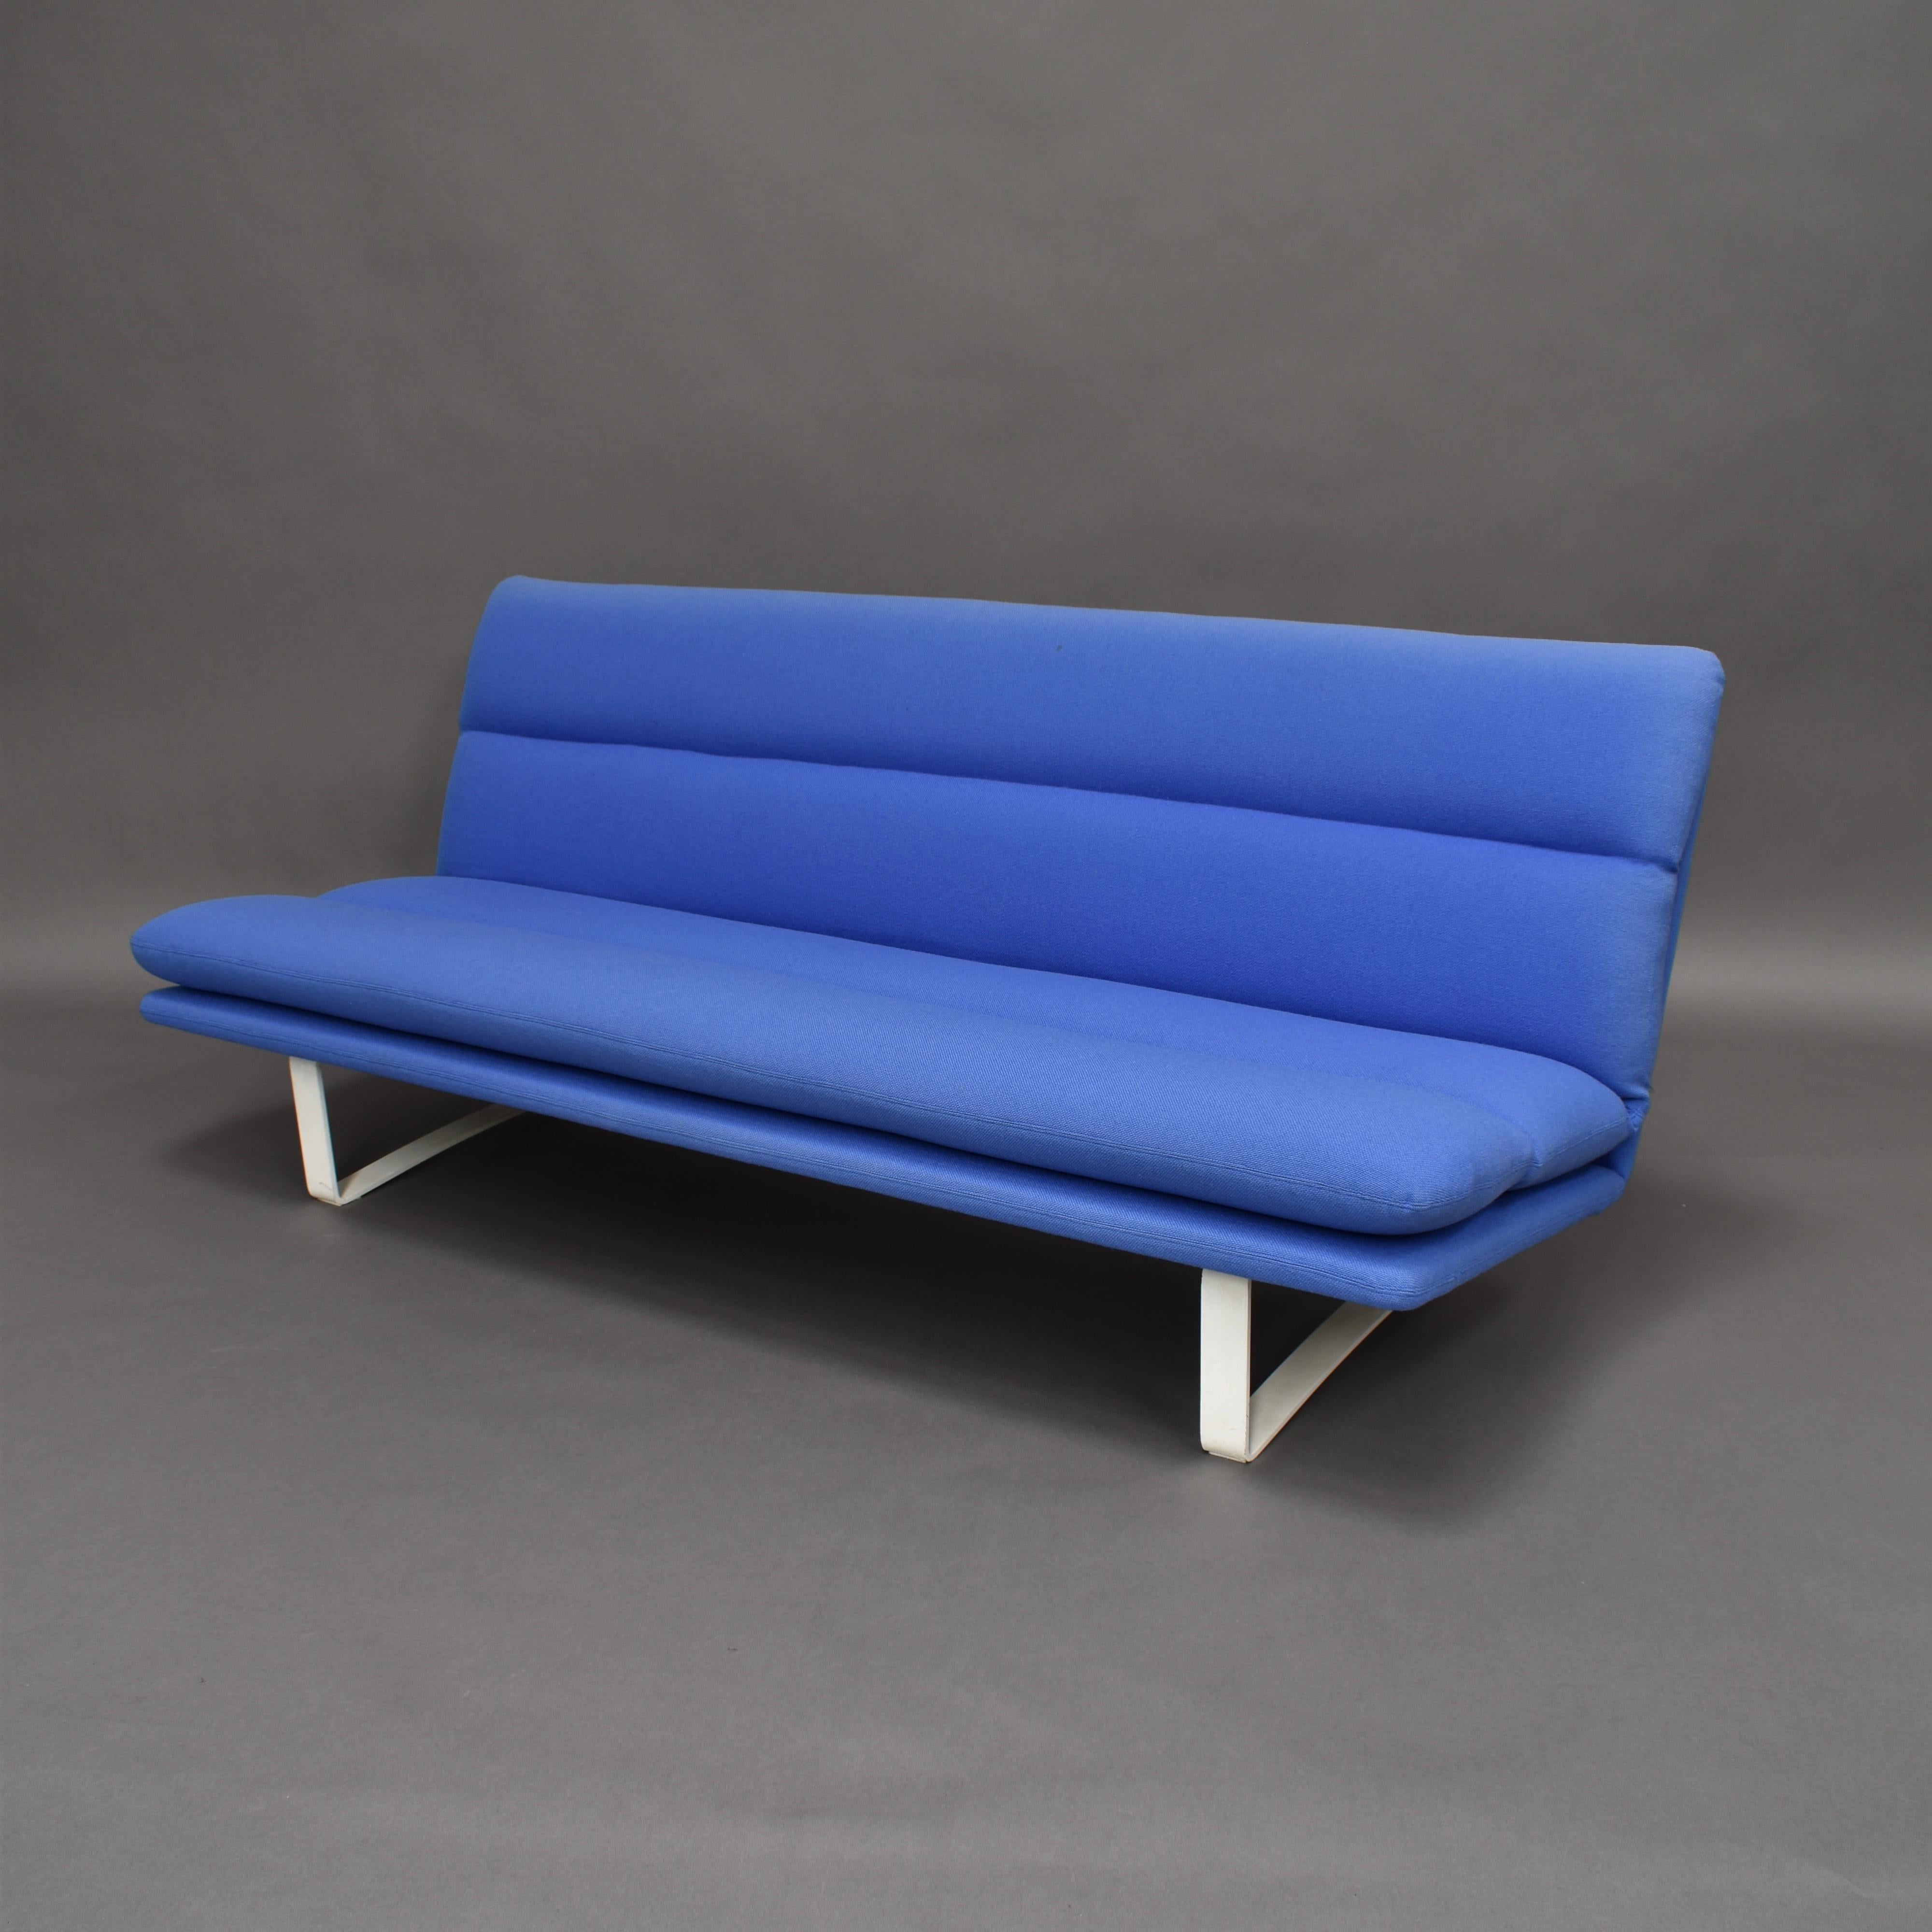 Three-seat sofa by Kho Liang Ie for Artifort- Netherlands, 1968
Model C684
The sofa is upholstered in blue Kvadrat Hallingdal wool fabric. It has some fading along the side, top and back and has some small stains (see images) but still remains in